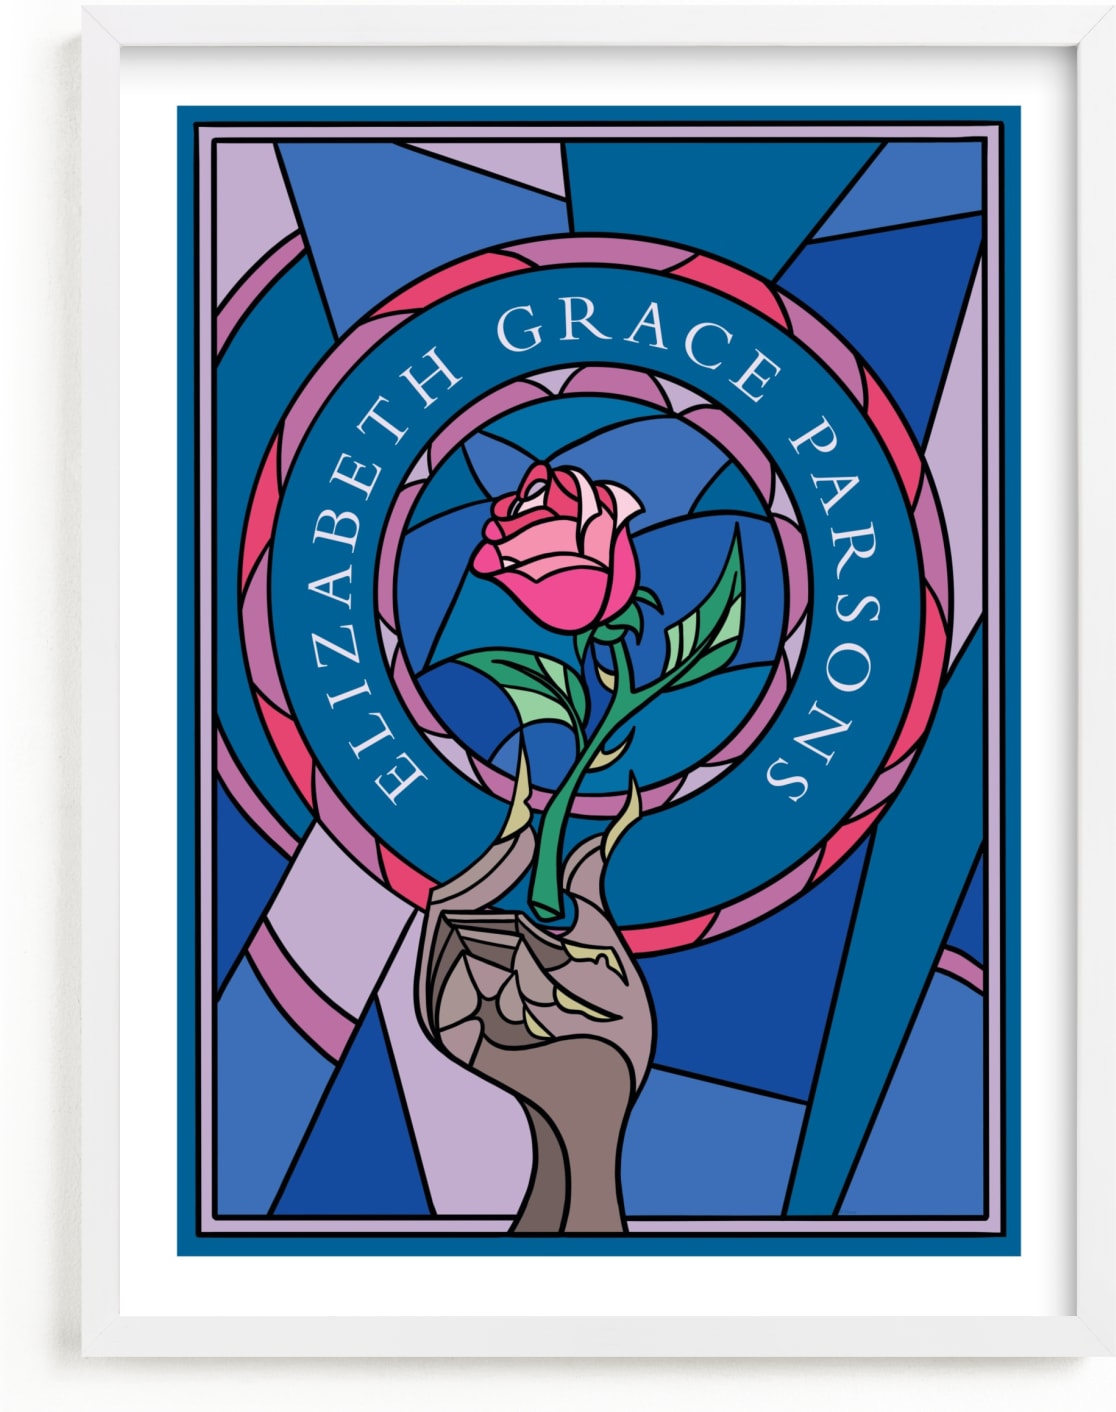 This is a blue disney art by Katharine Watson called Disney's Beauty And The Beast Stained Glass.